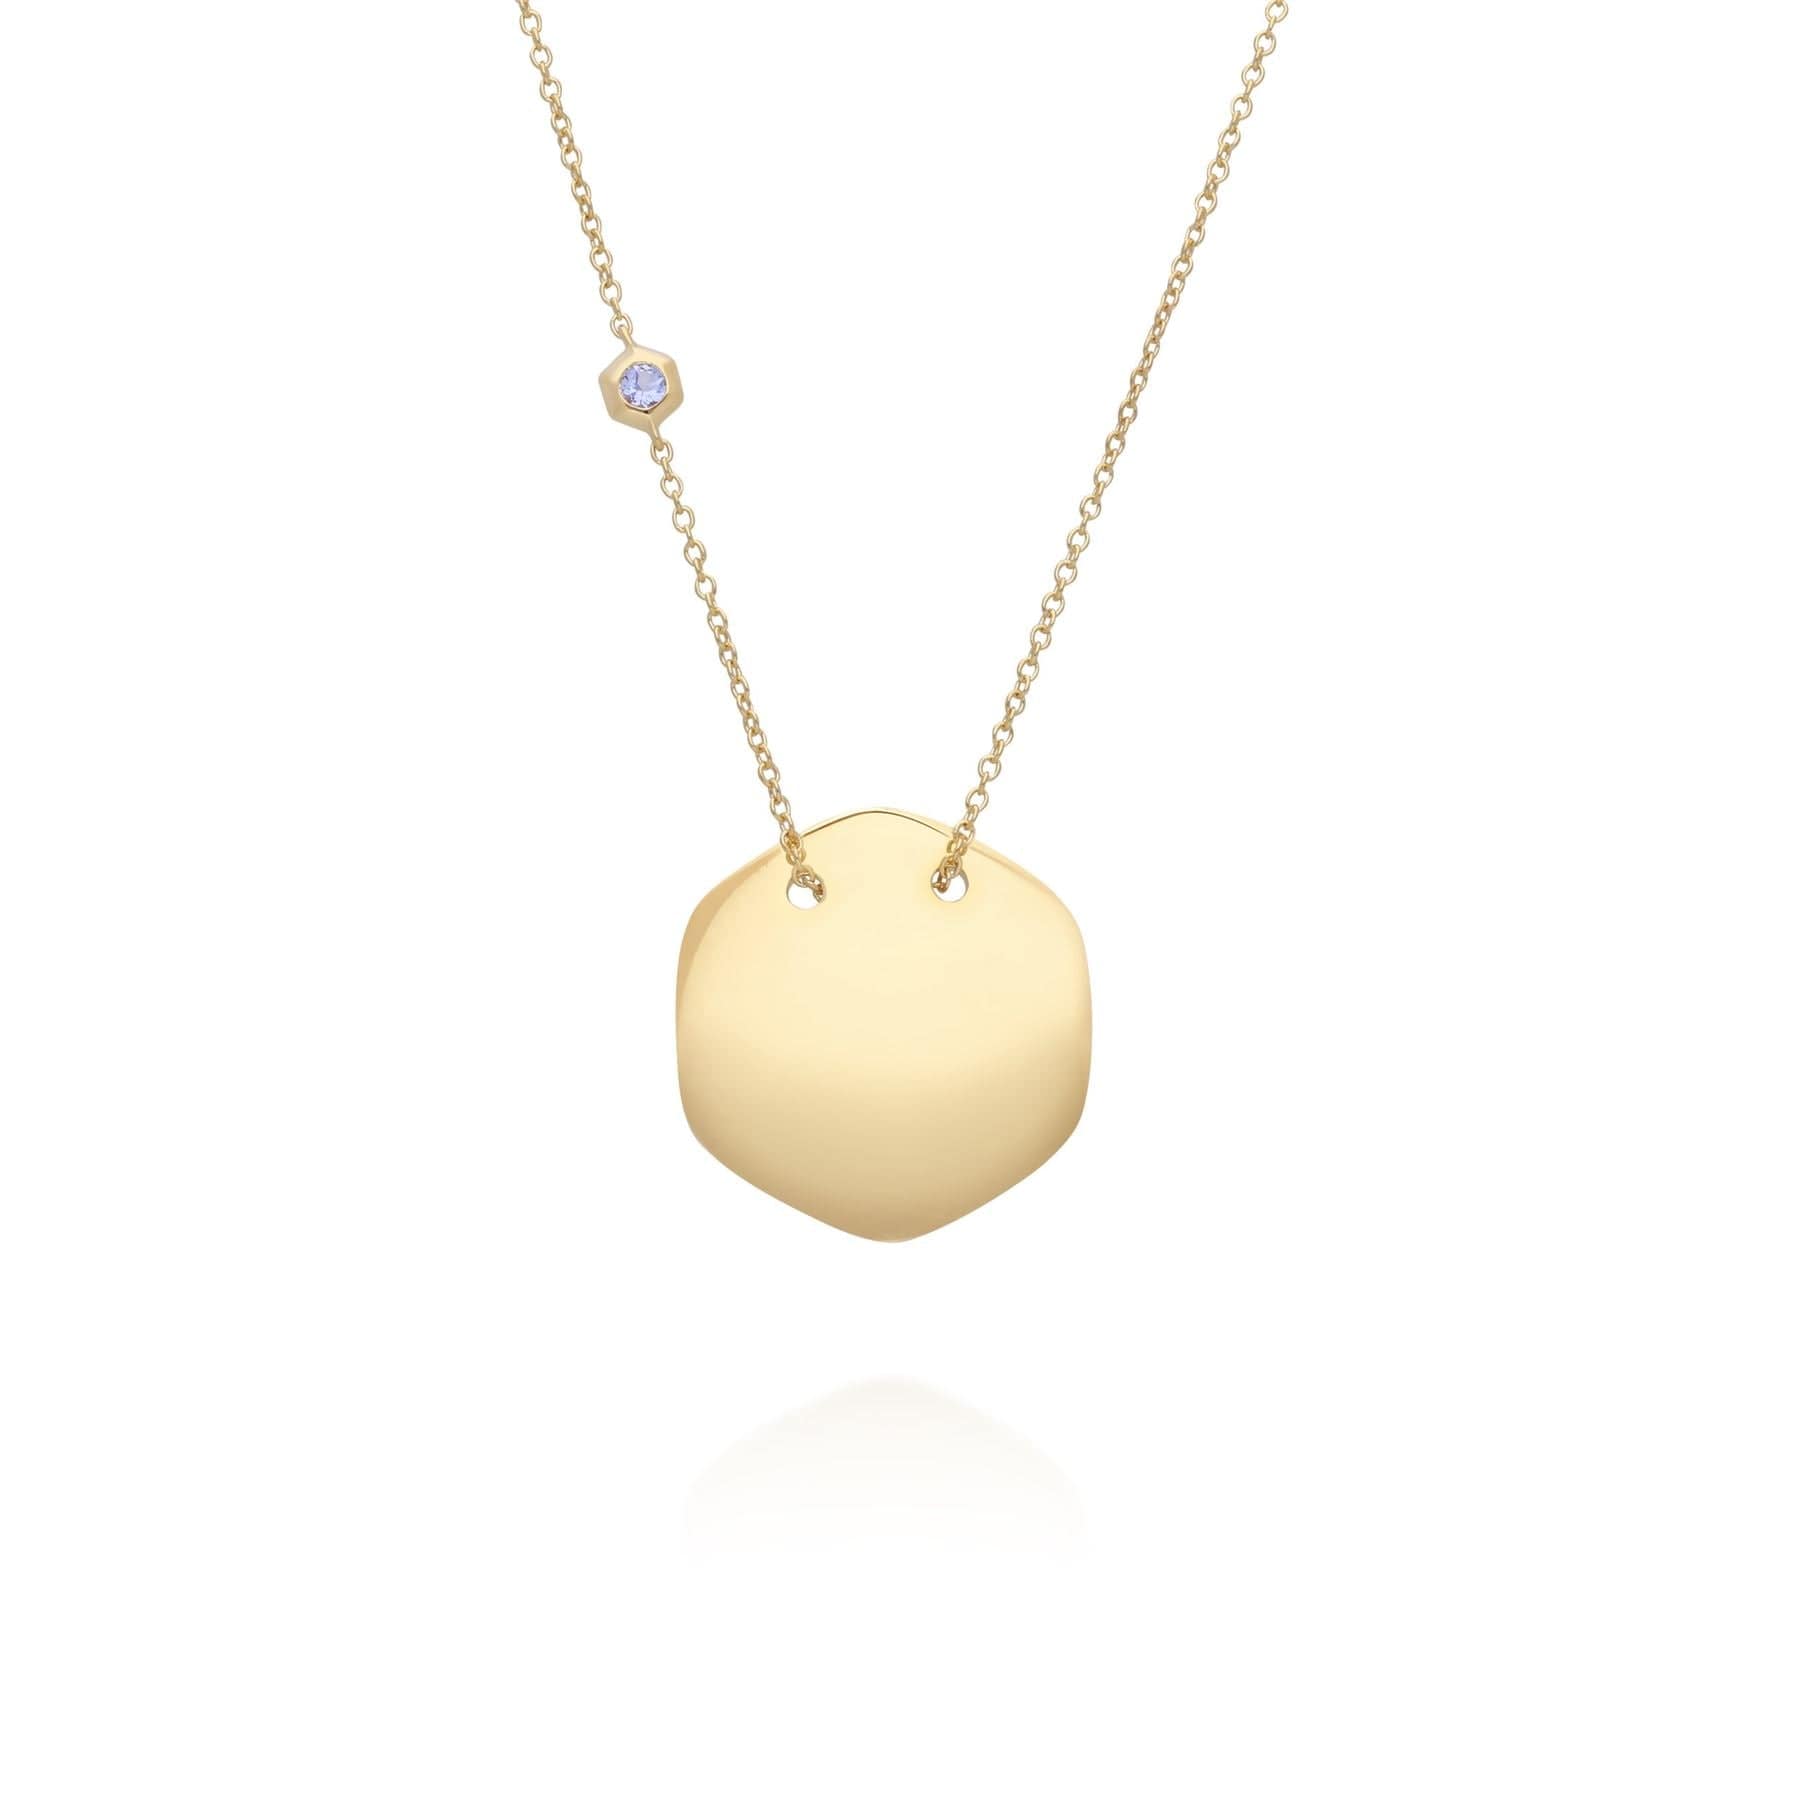 Tanzanite Engravable Necklace in Yellow Gold Plated Sterling Silver - Gemondo